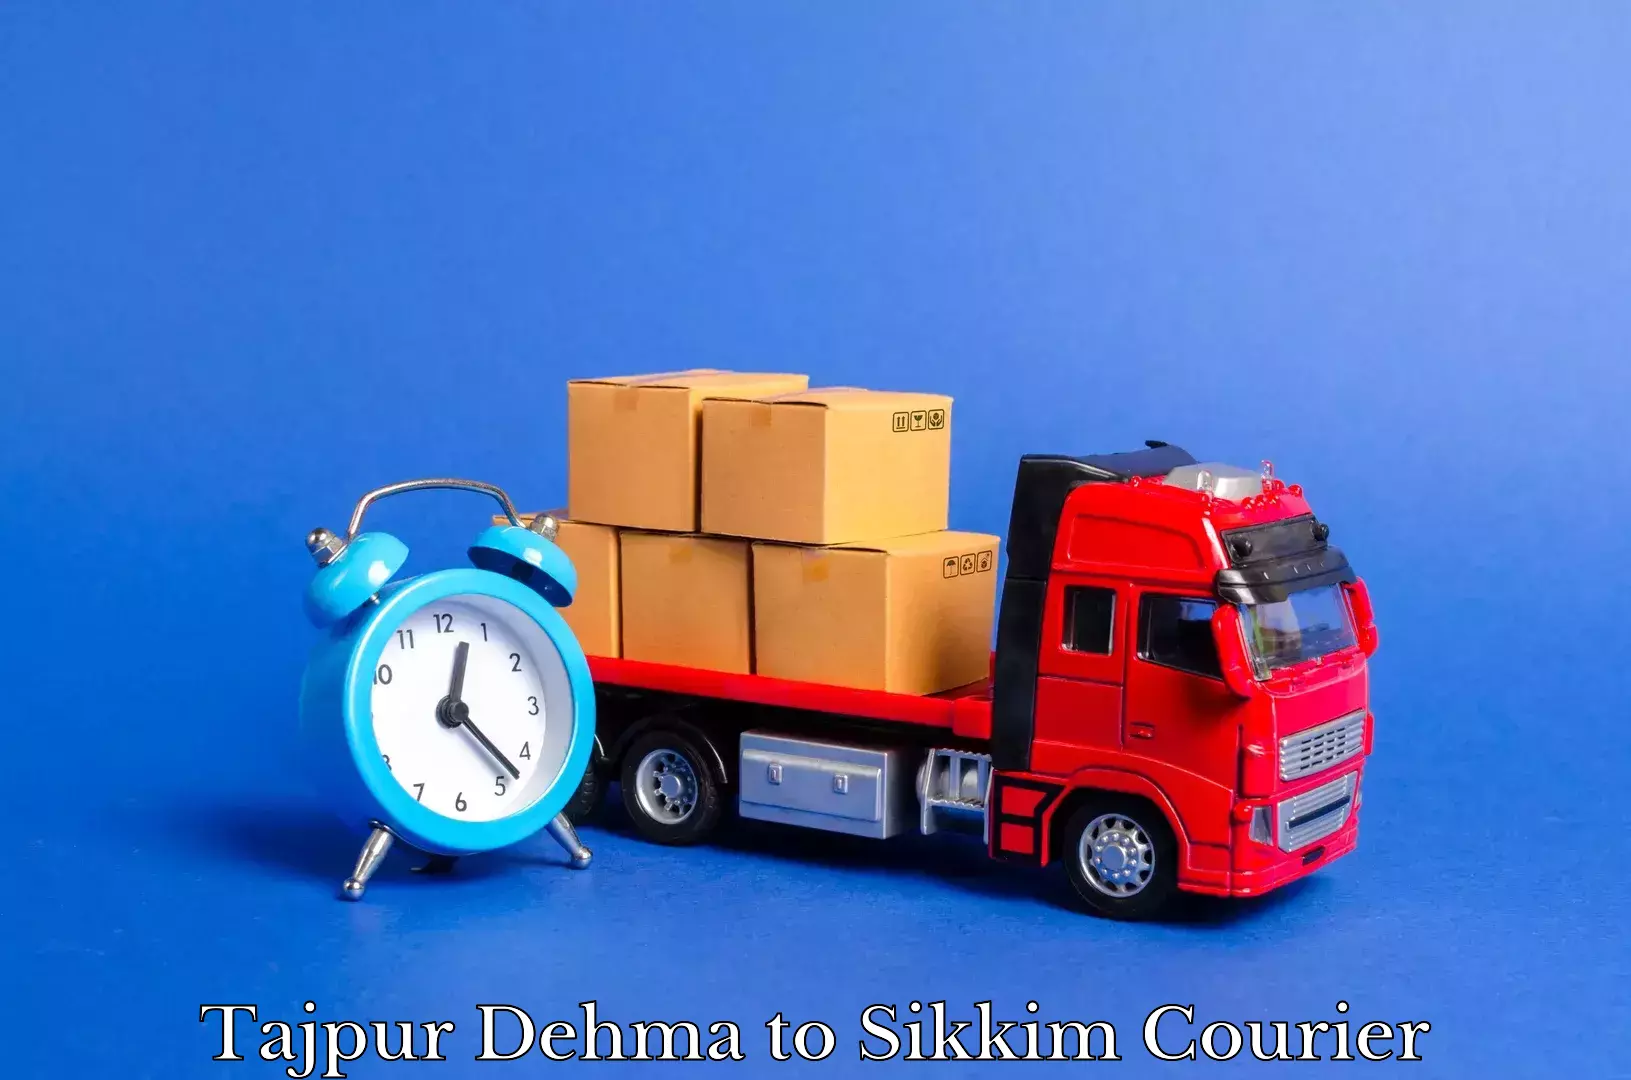 Furniture delivery service Tajpur Dehma to Geyzing